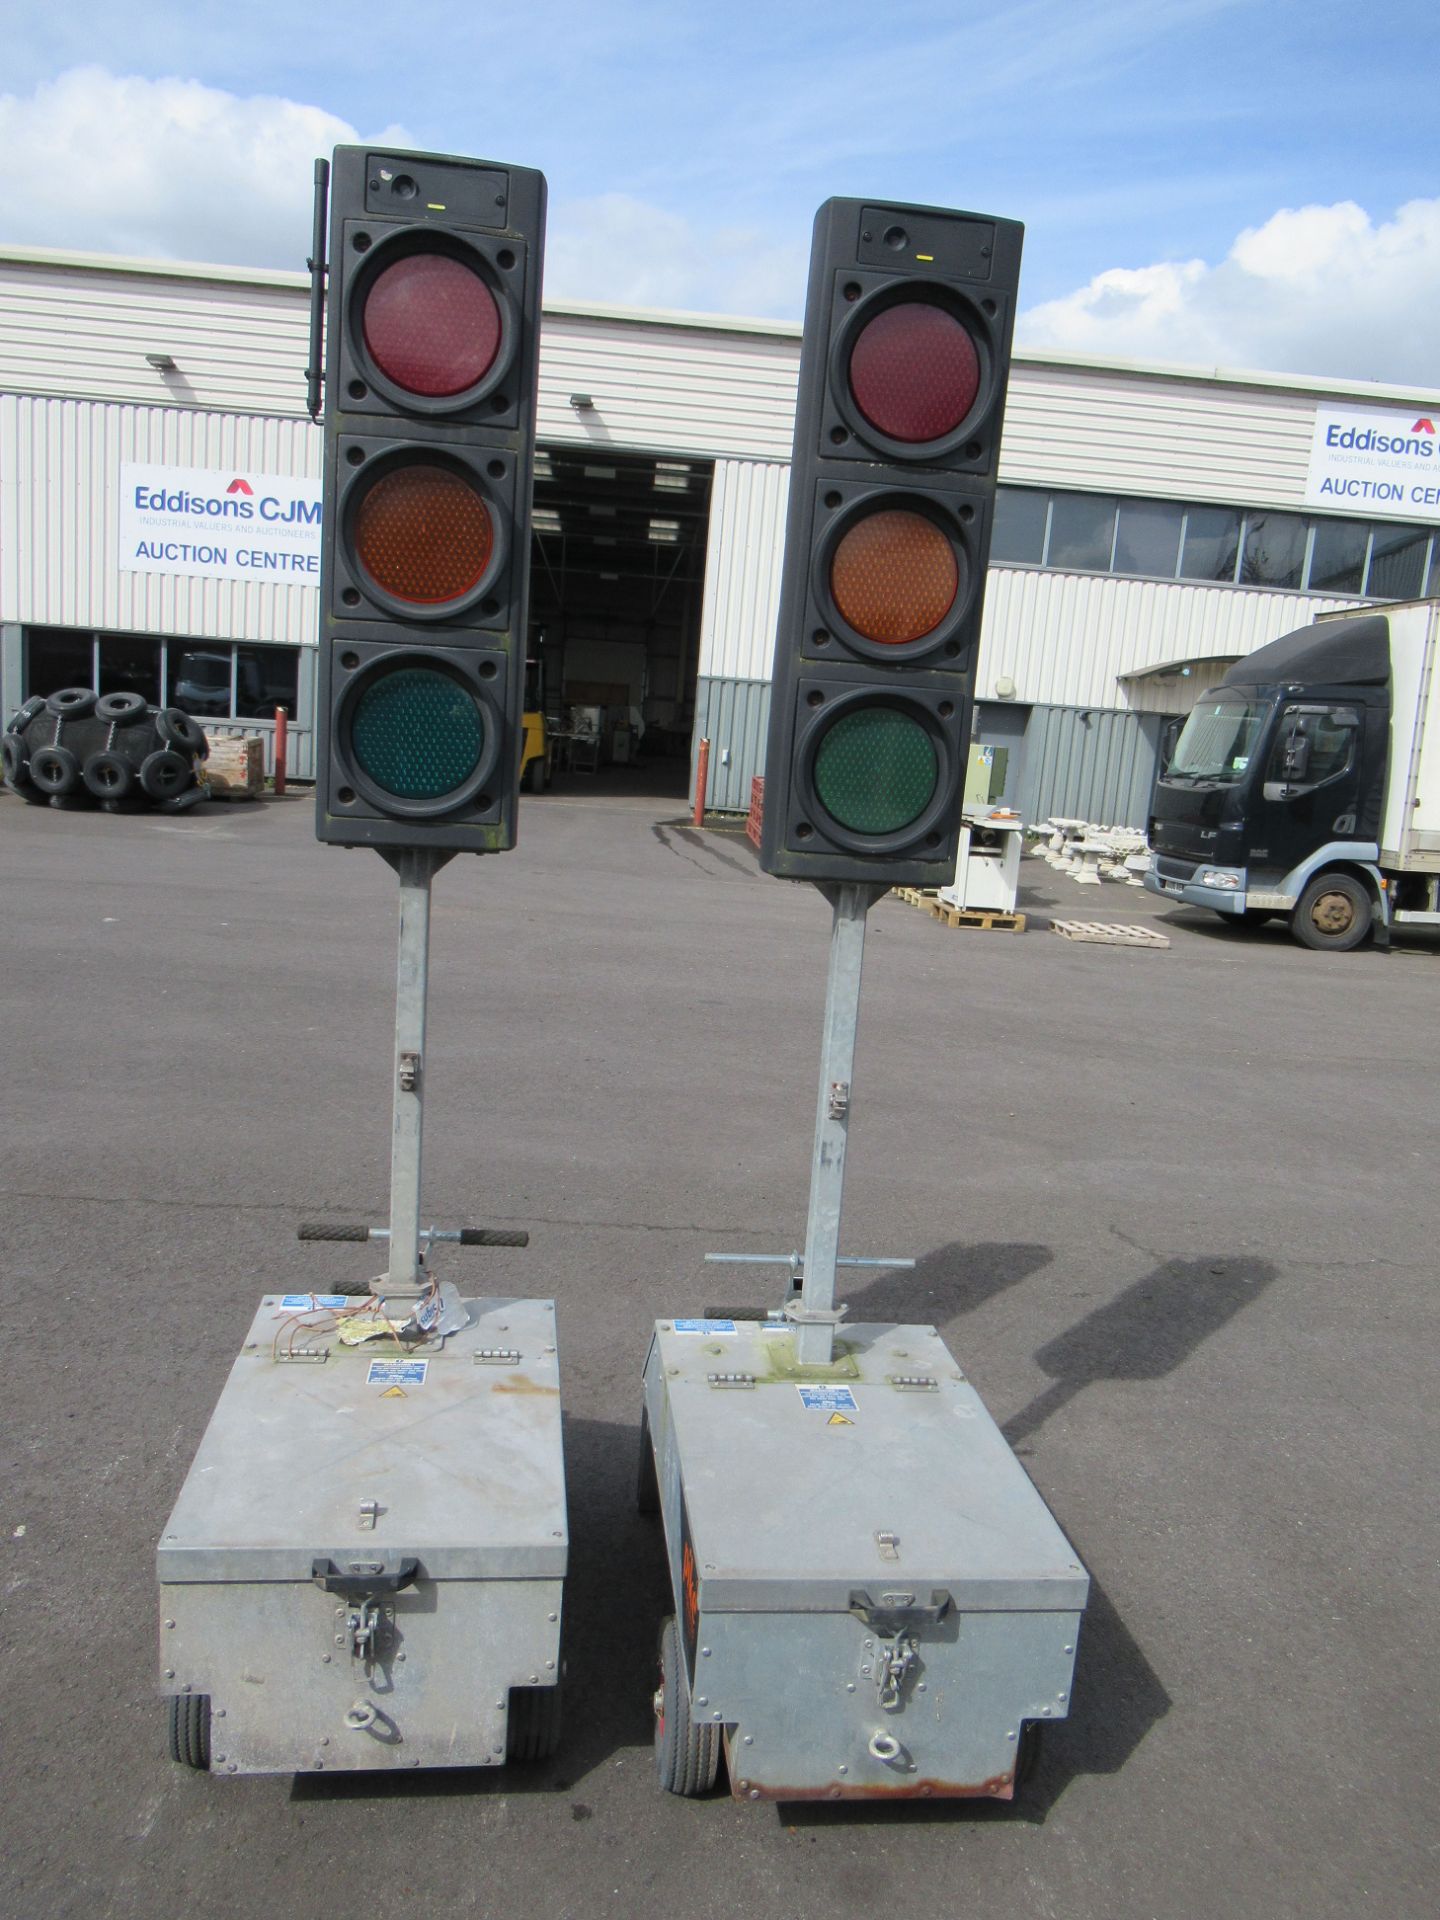 A Pair of Pike Signals Ltd "Vehicle" Battery Powered Portable Traffic Light Units - Image 2 of 7